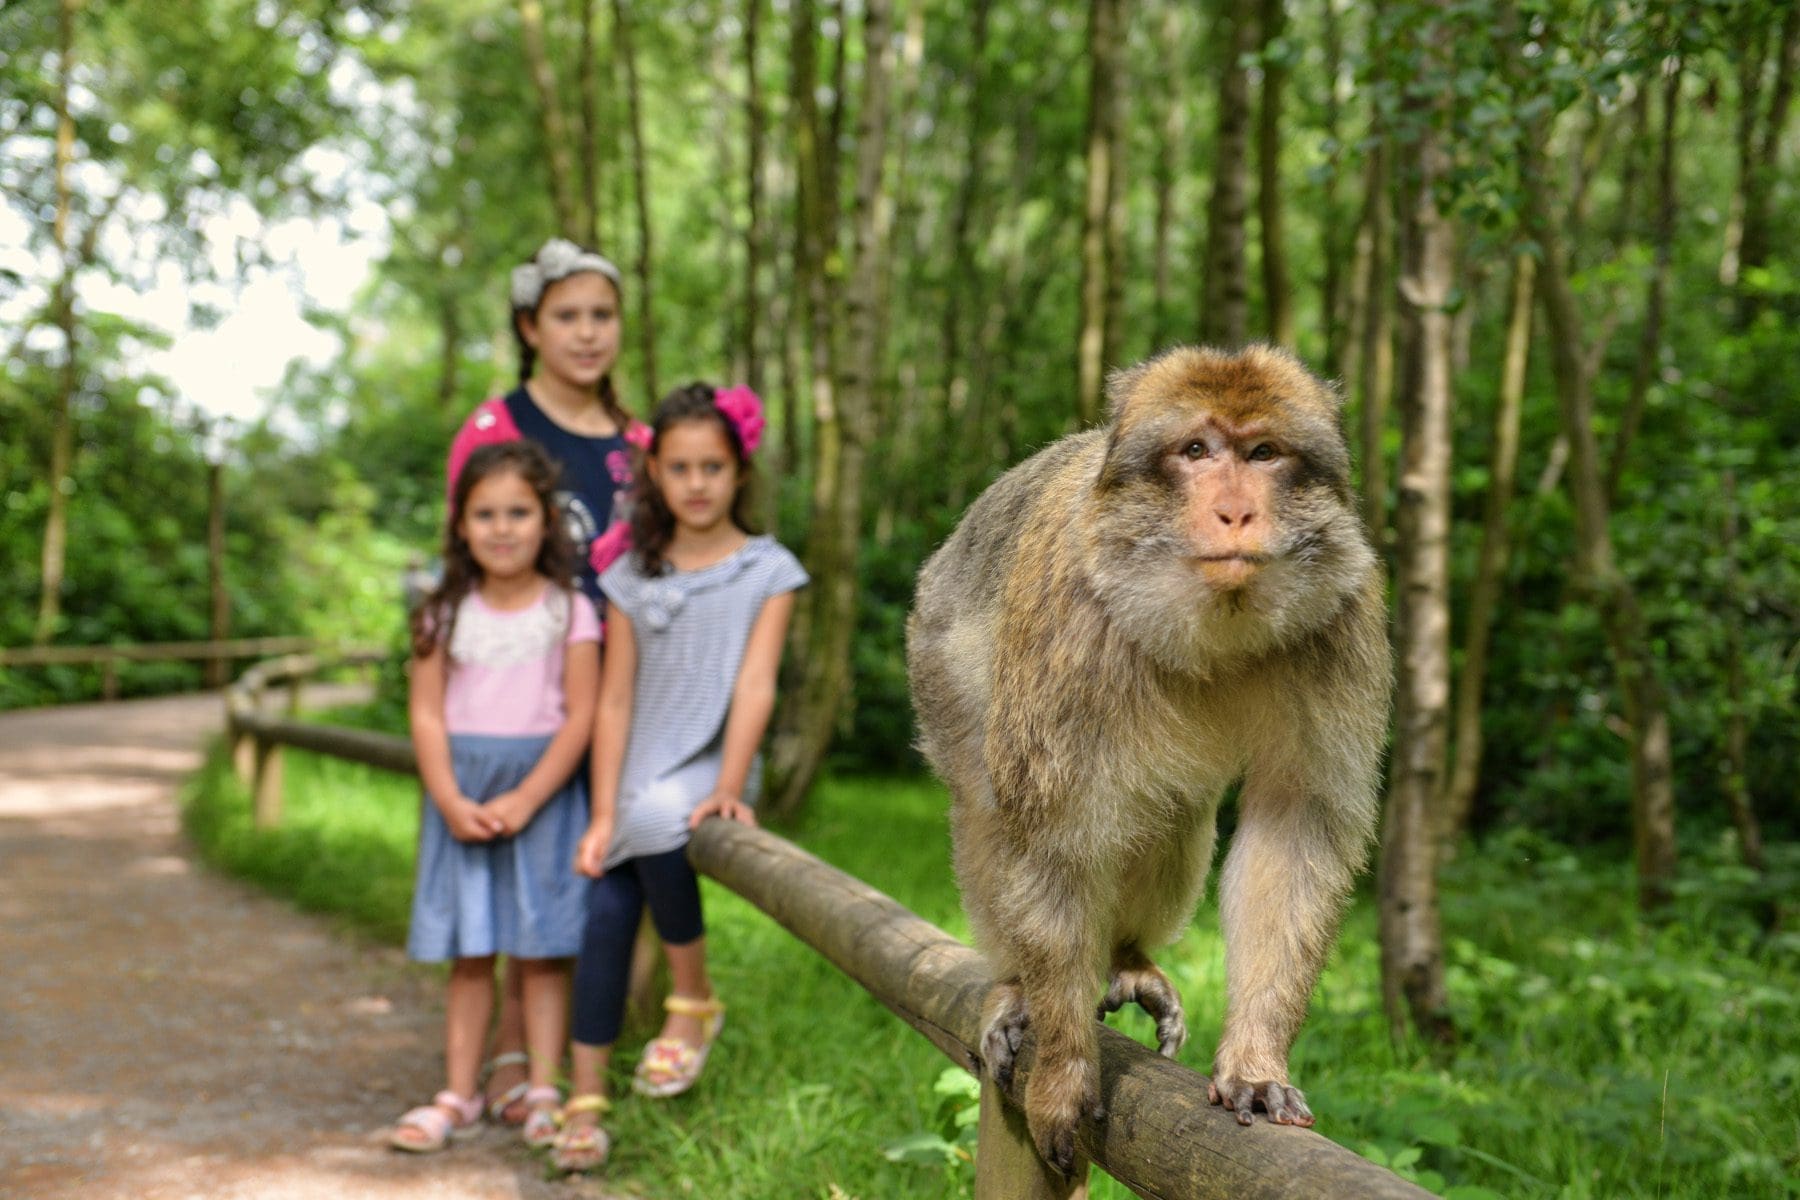 Trentham Monkey Forest Reopens